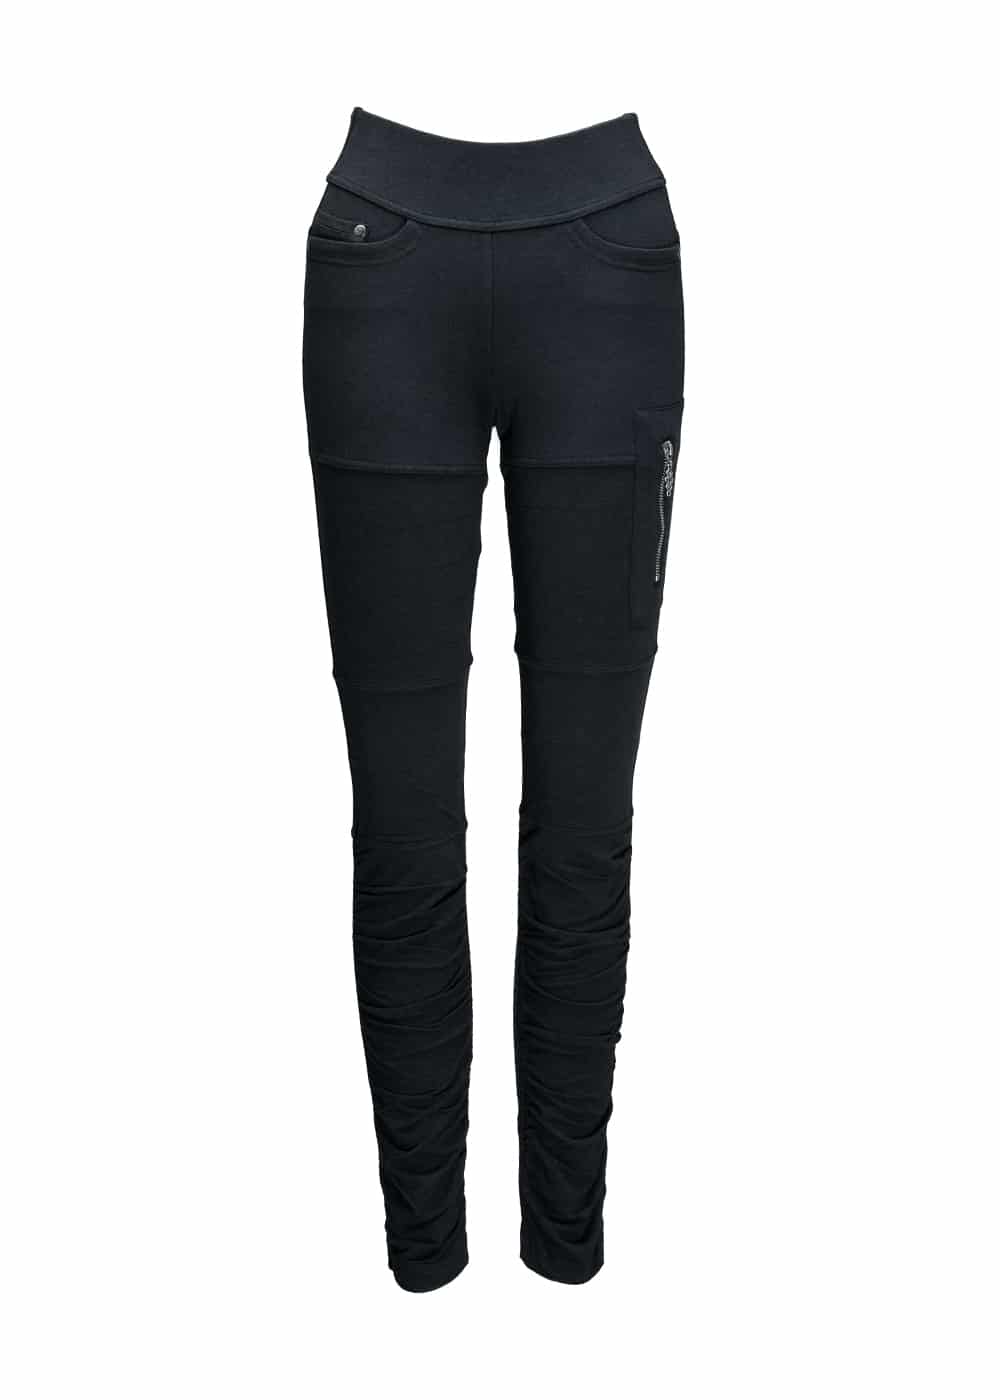 Nomads hemp wear drifter pants in black, ethical sustainable womens fashion brand made from bamboo and organic cotton, found at Tantrika Australia